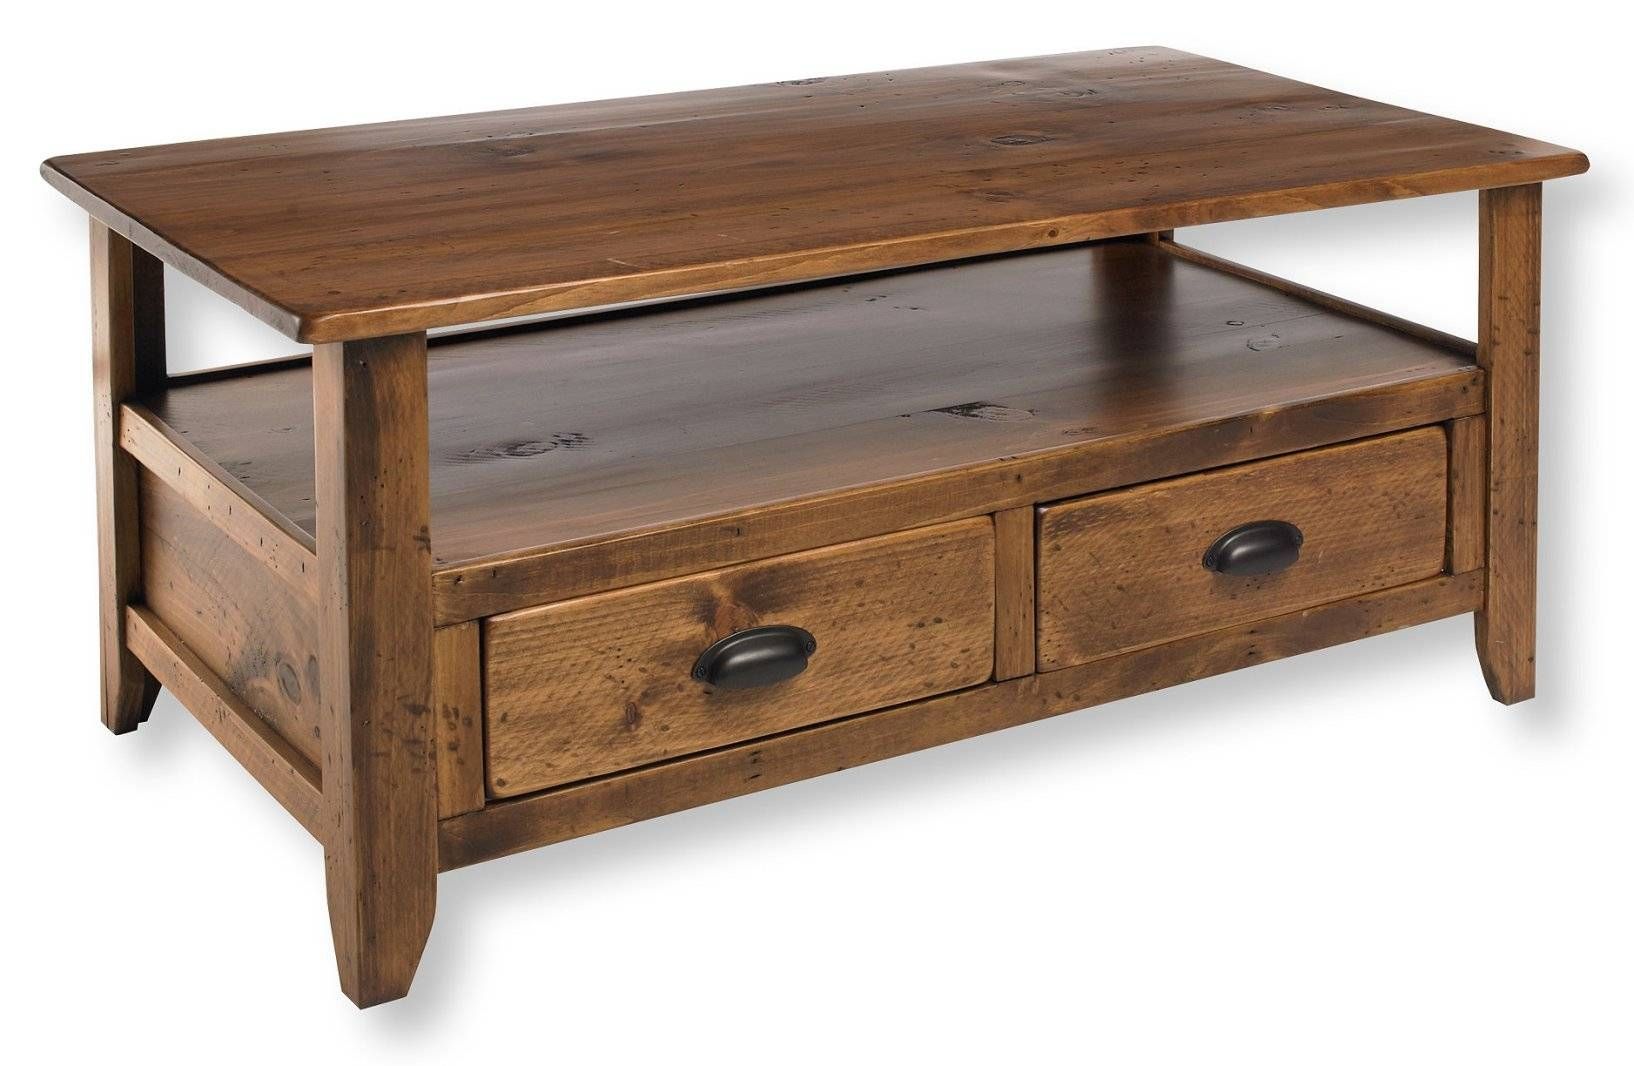 Great Coffee Table With Drawers Ideas – Small Coffee Table With For Rustic Coffee Table Drawers (View 2 of 30)